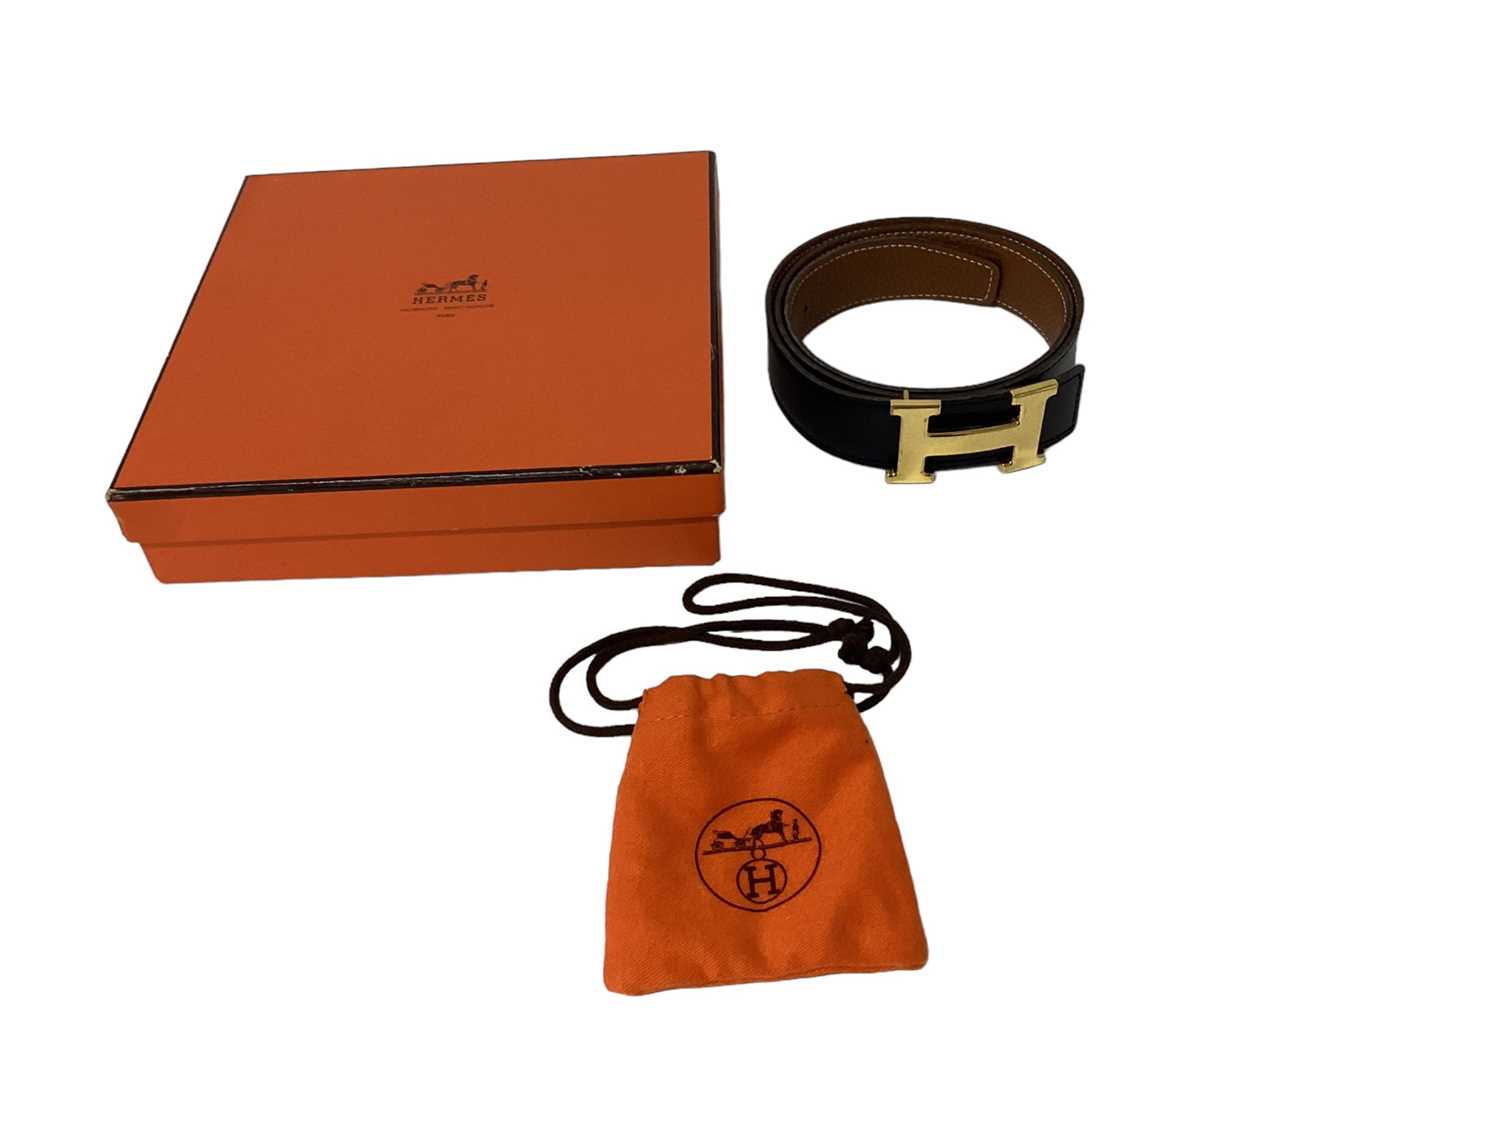 Lot 2061 - Hermès reversible Swift calfskin and Epsom calfskin leather belt, in black and brown, with a gilt metal 'H' buckle stamped - Hermes, in original box